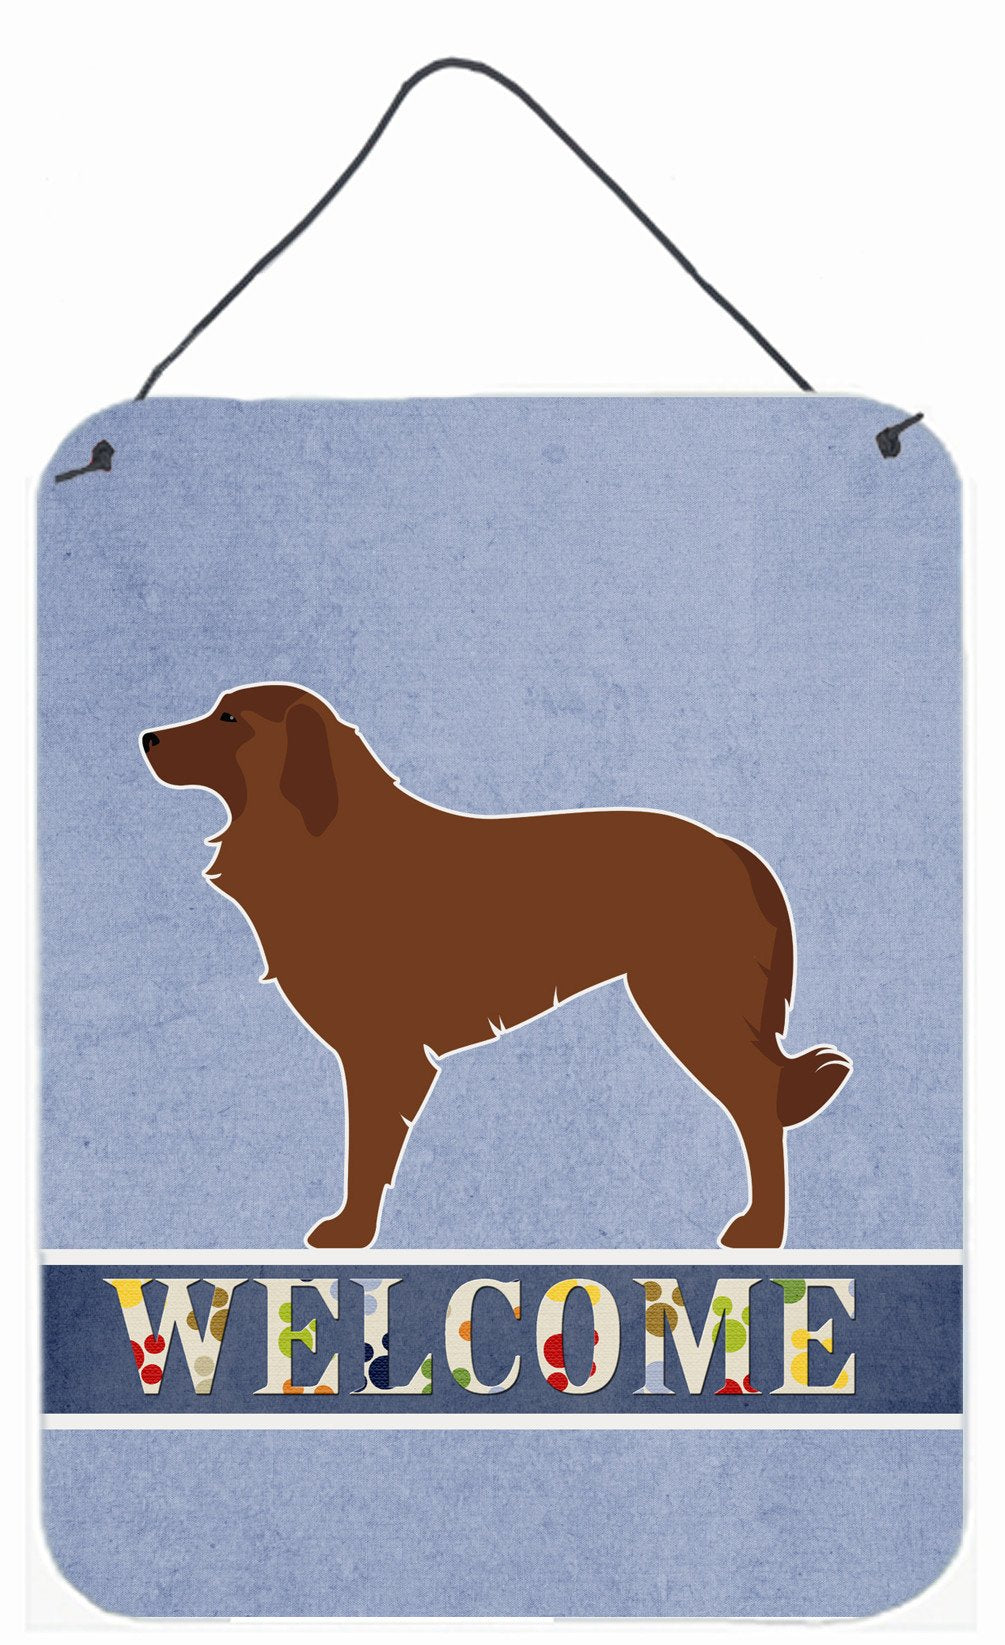 Portuguese Sheepdog Dog Welcome Wall or Door Hanging Prints BB5535DS1216 by Caroline's Treasures